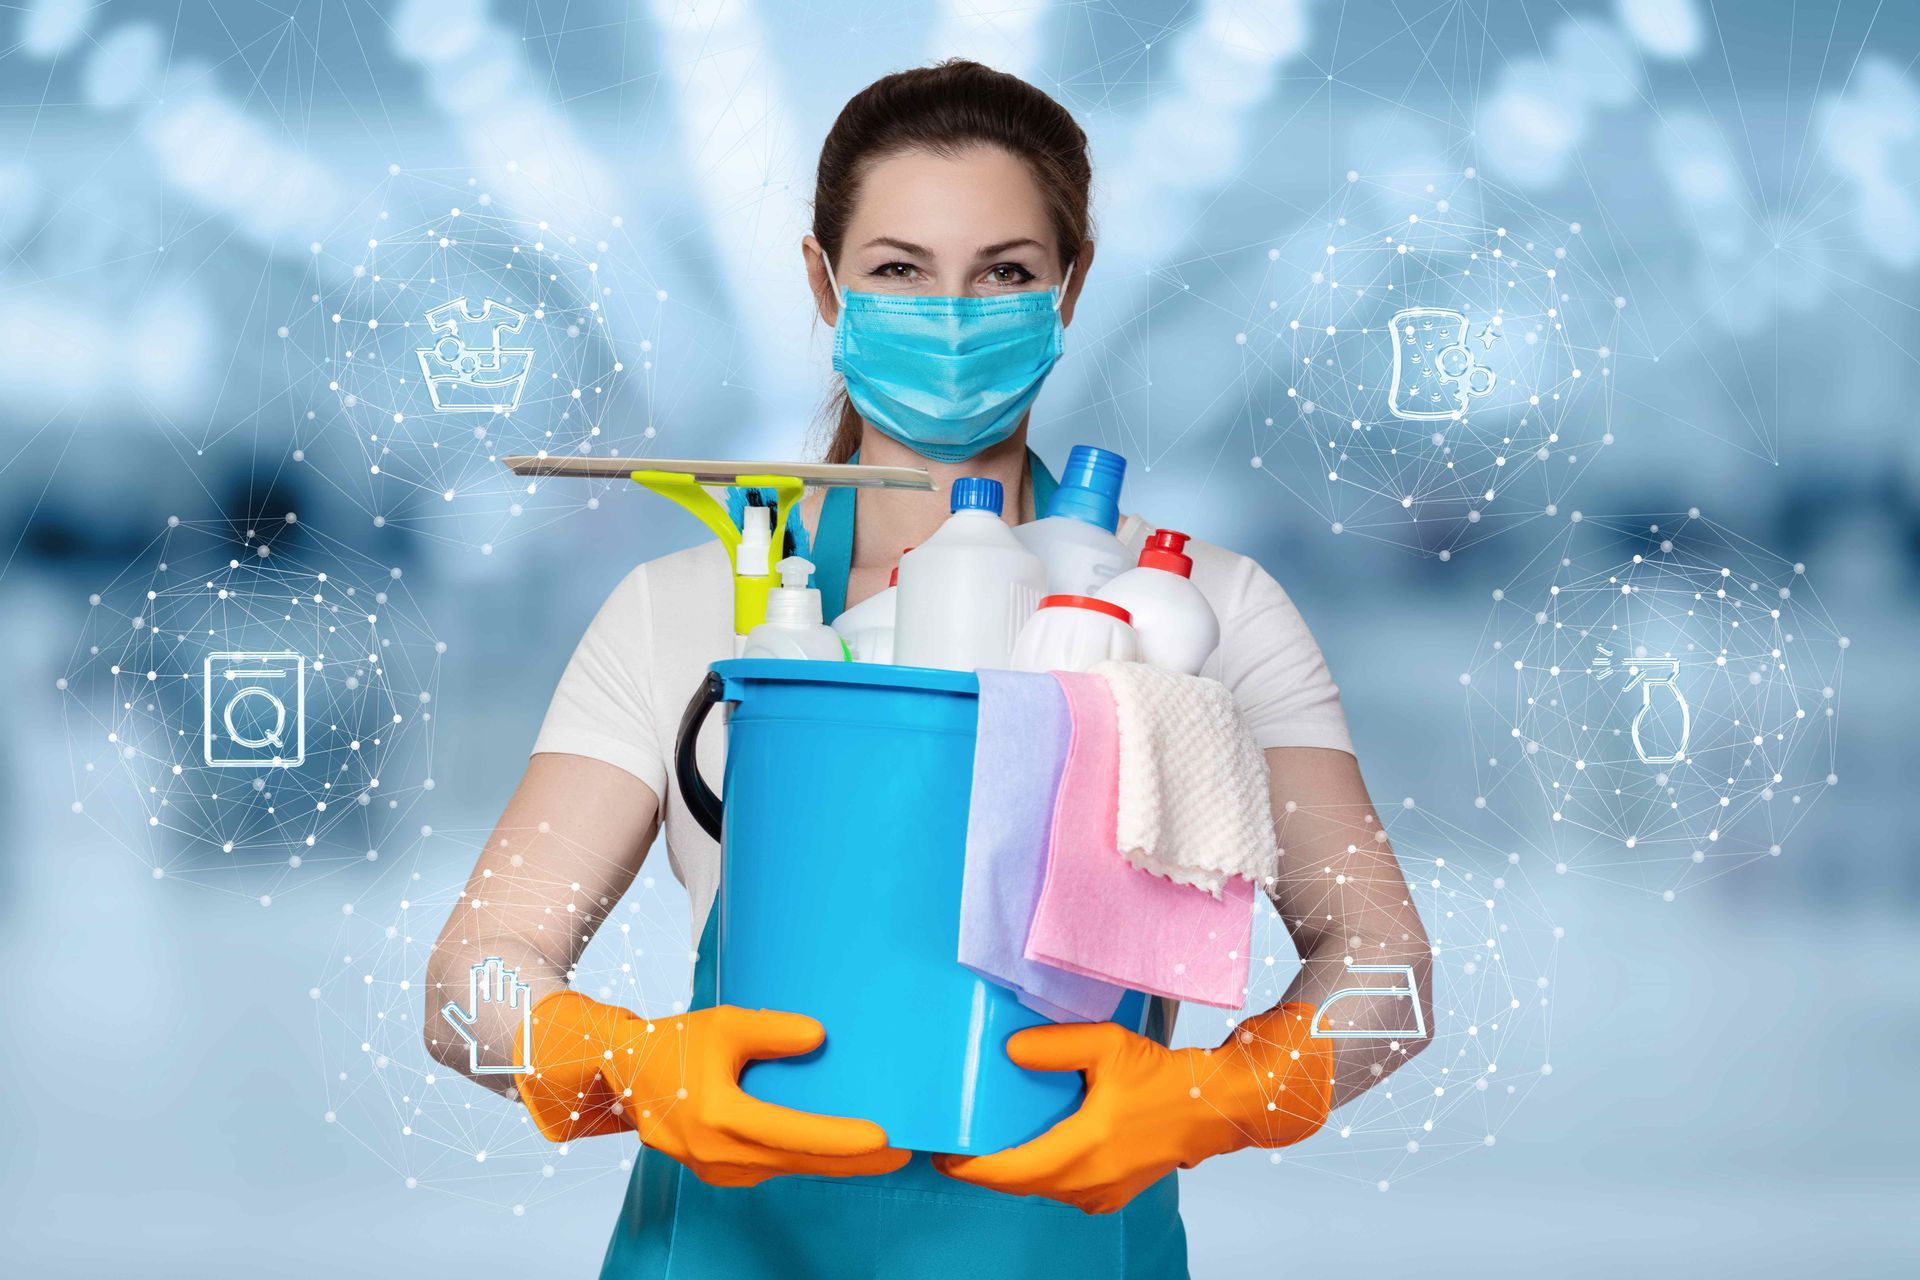 a woman wearing a mask and gloves is holding a bucket of cleaning supplies